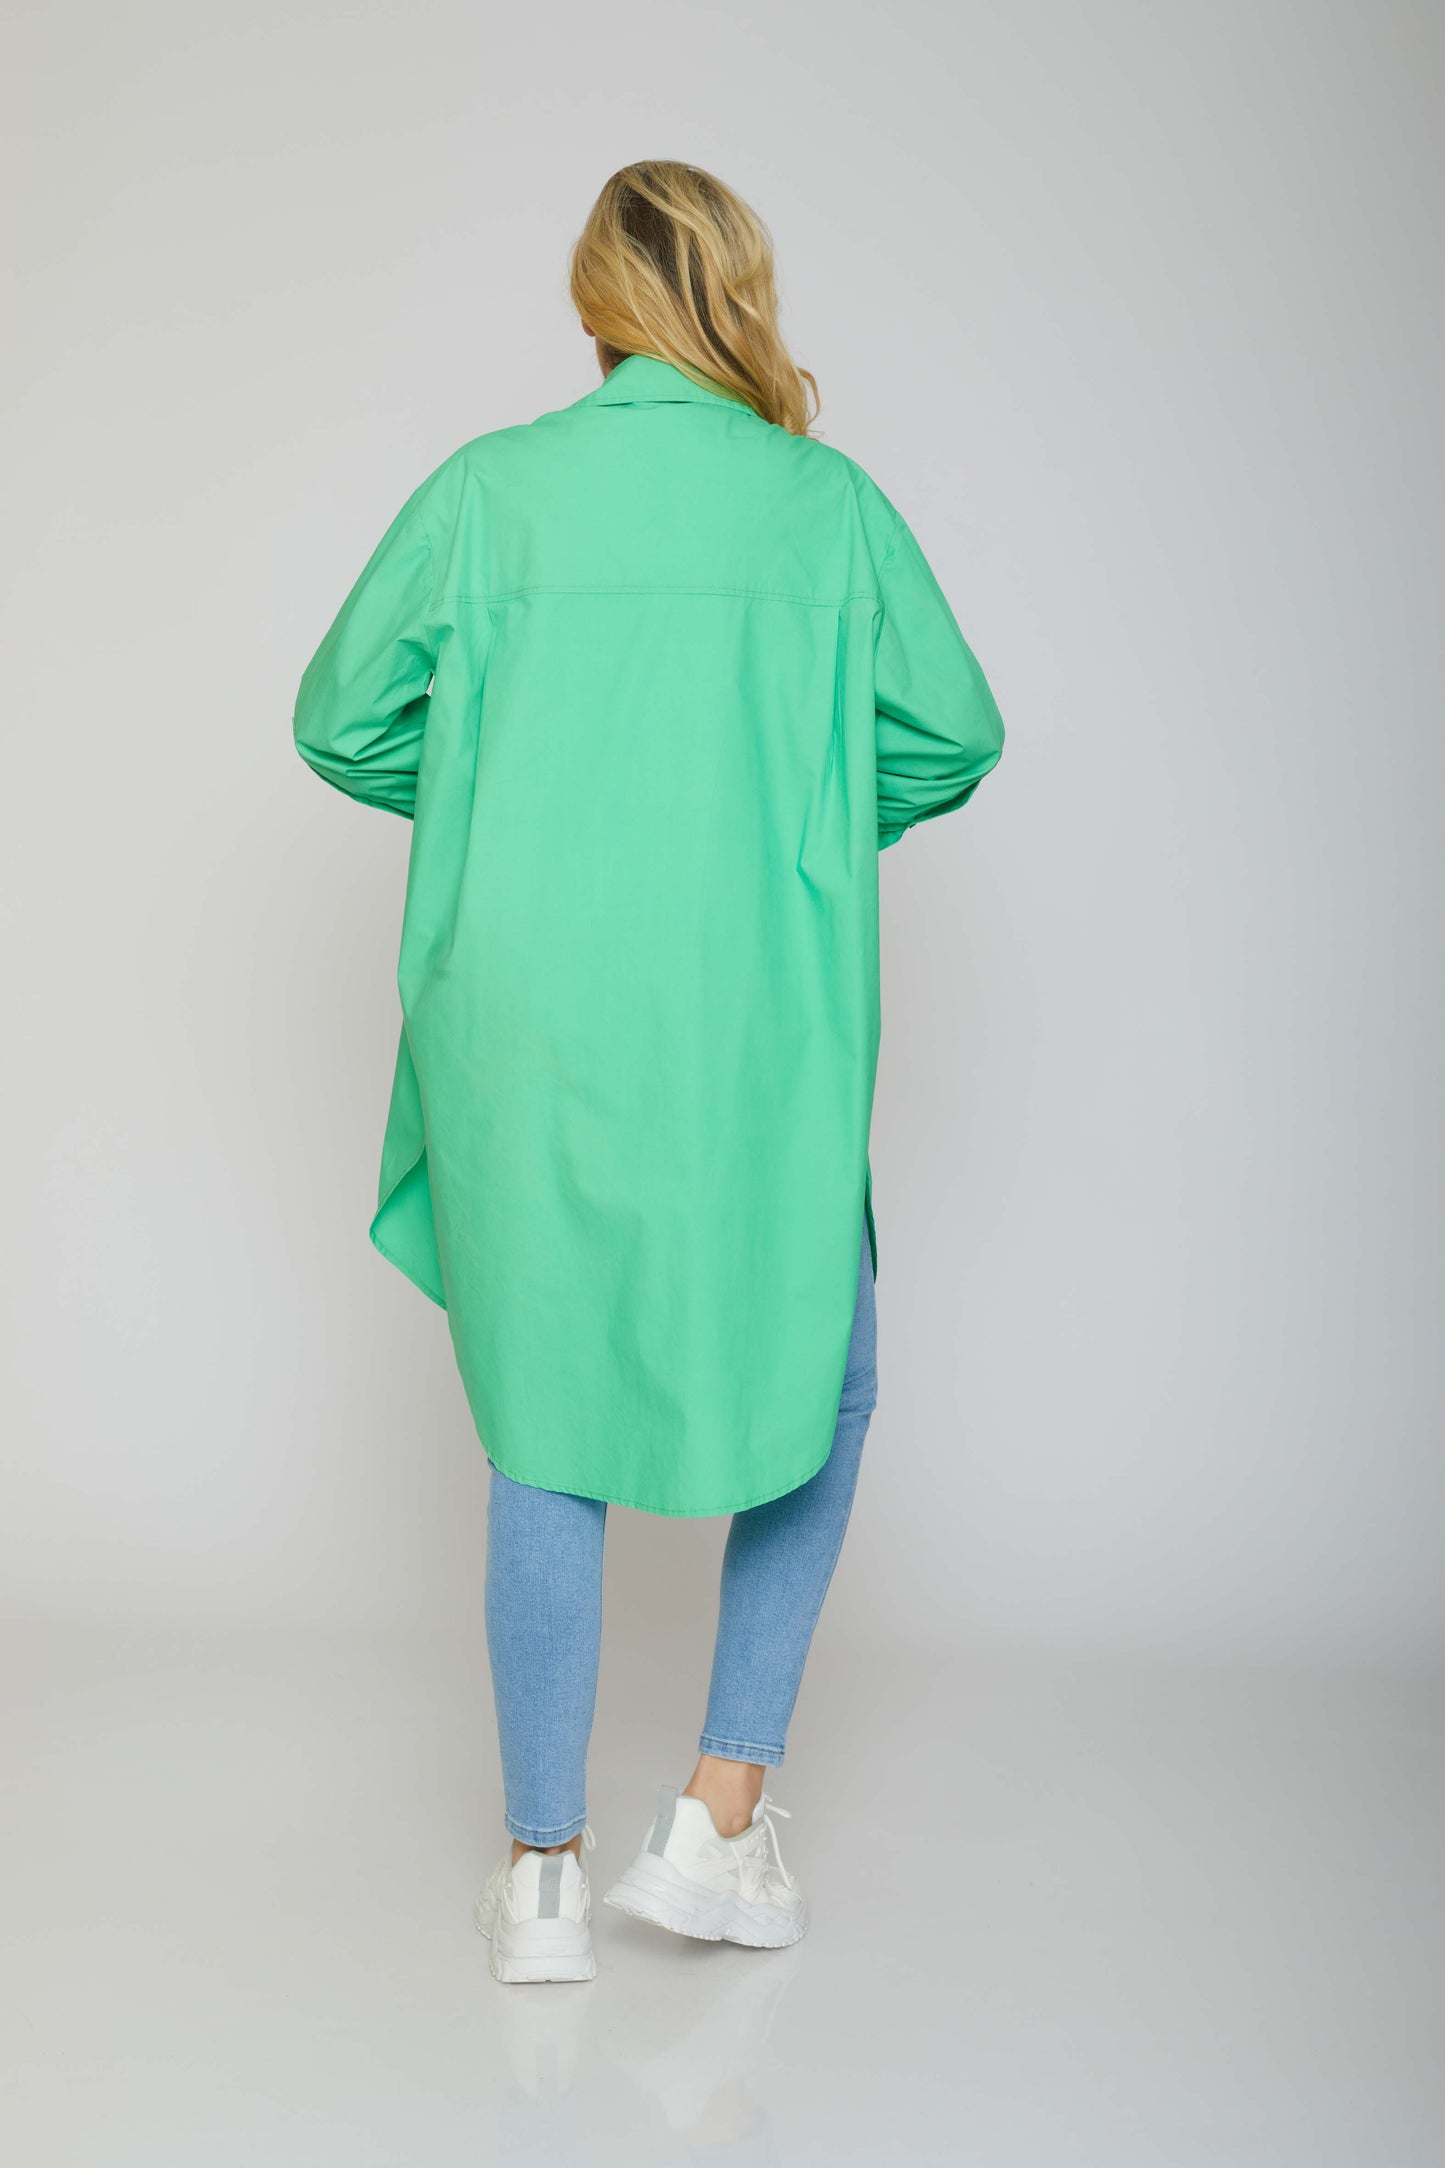 dj oversized shirt with long sleeves - green